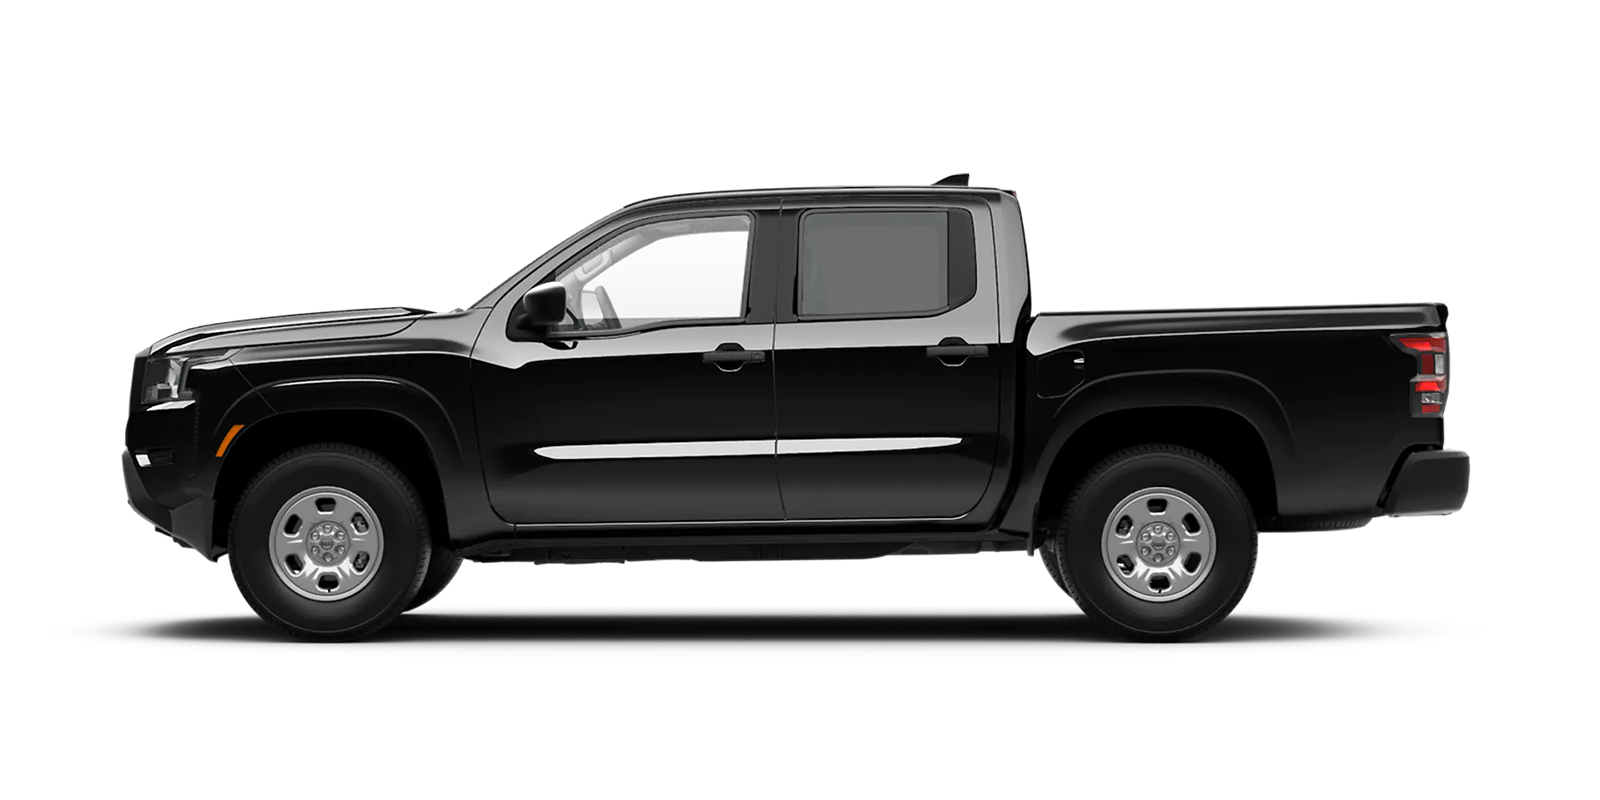 2022 Frontier Crew Cab S 4x4 in Super Black | Fort Collins Nissan in Fort Collins CO